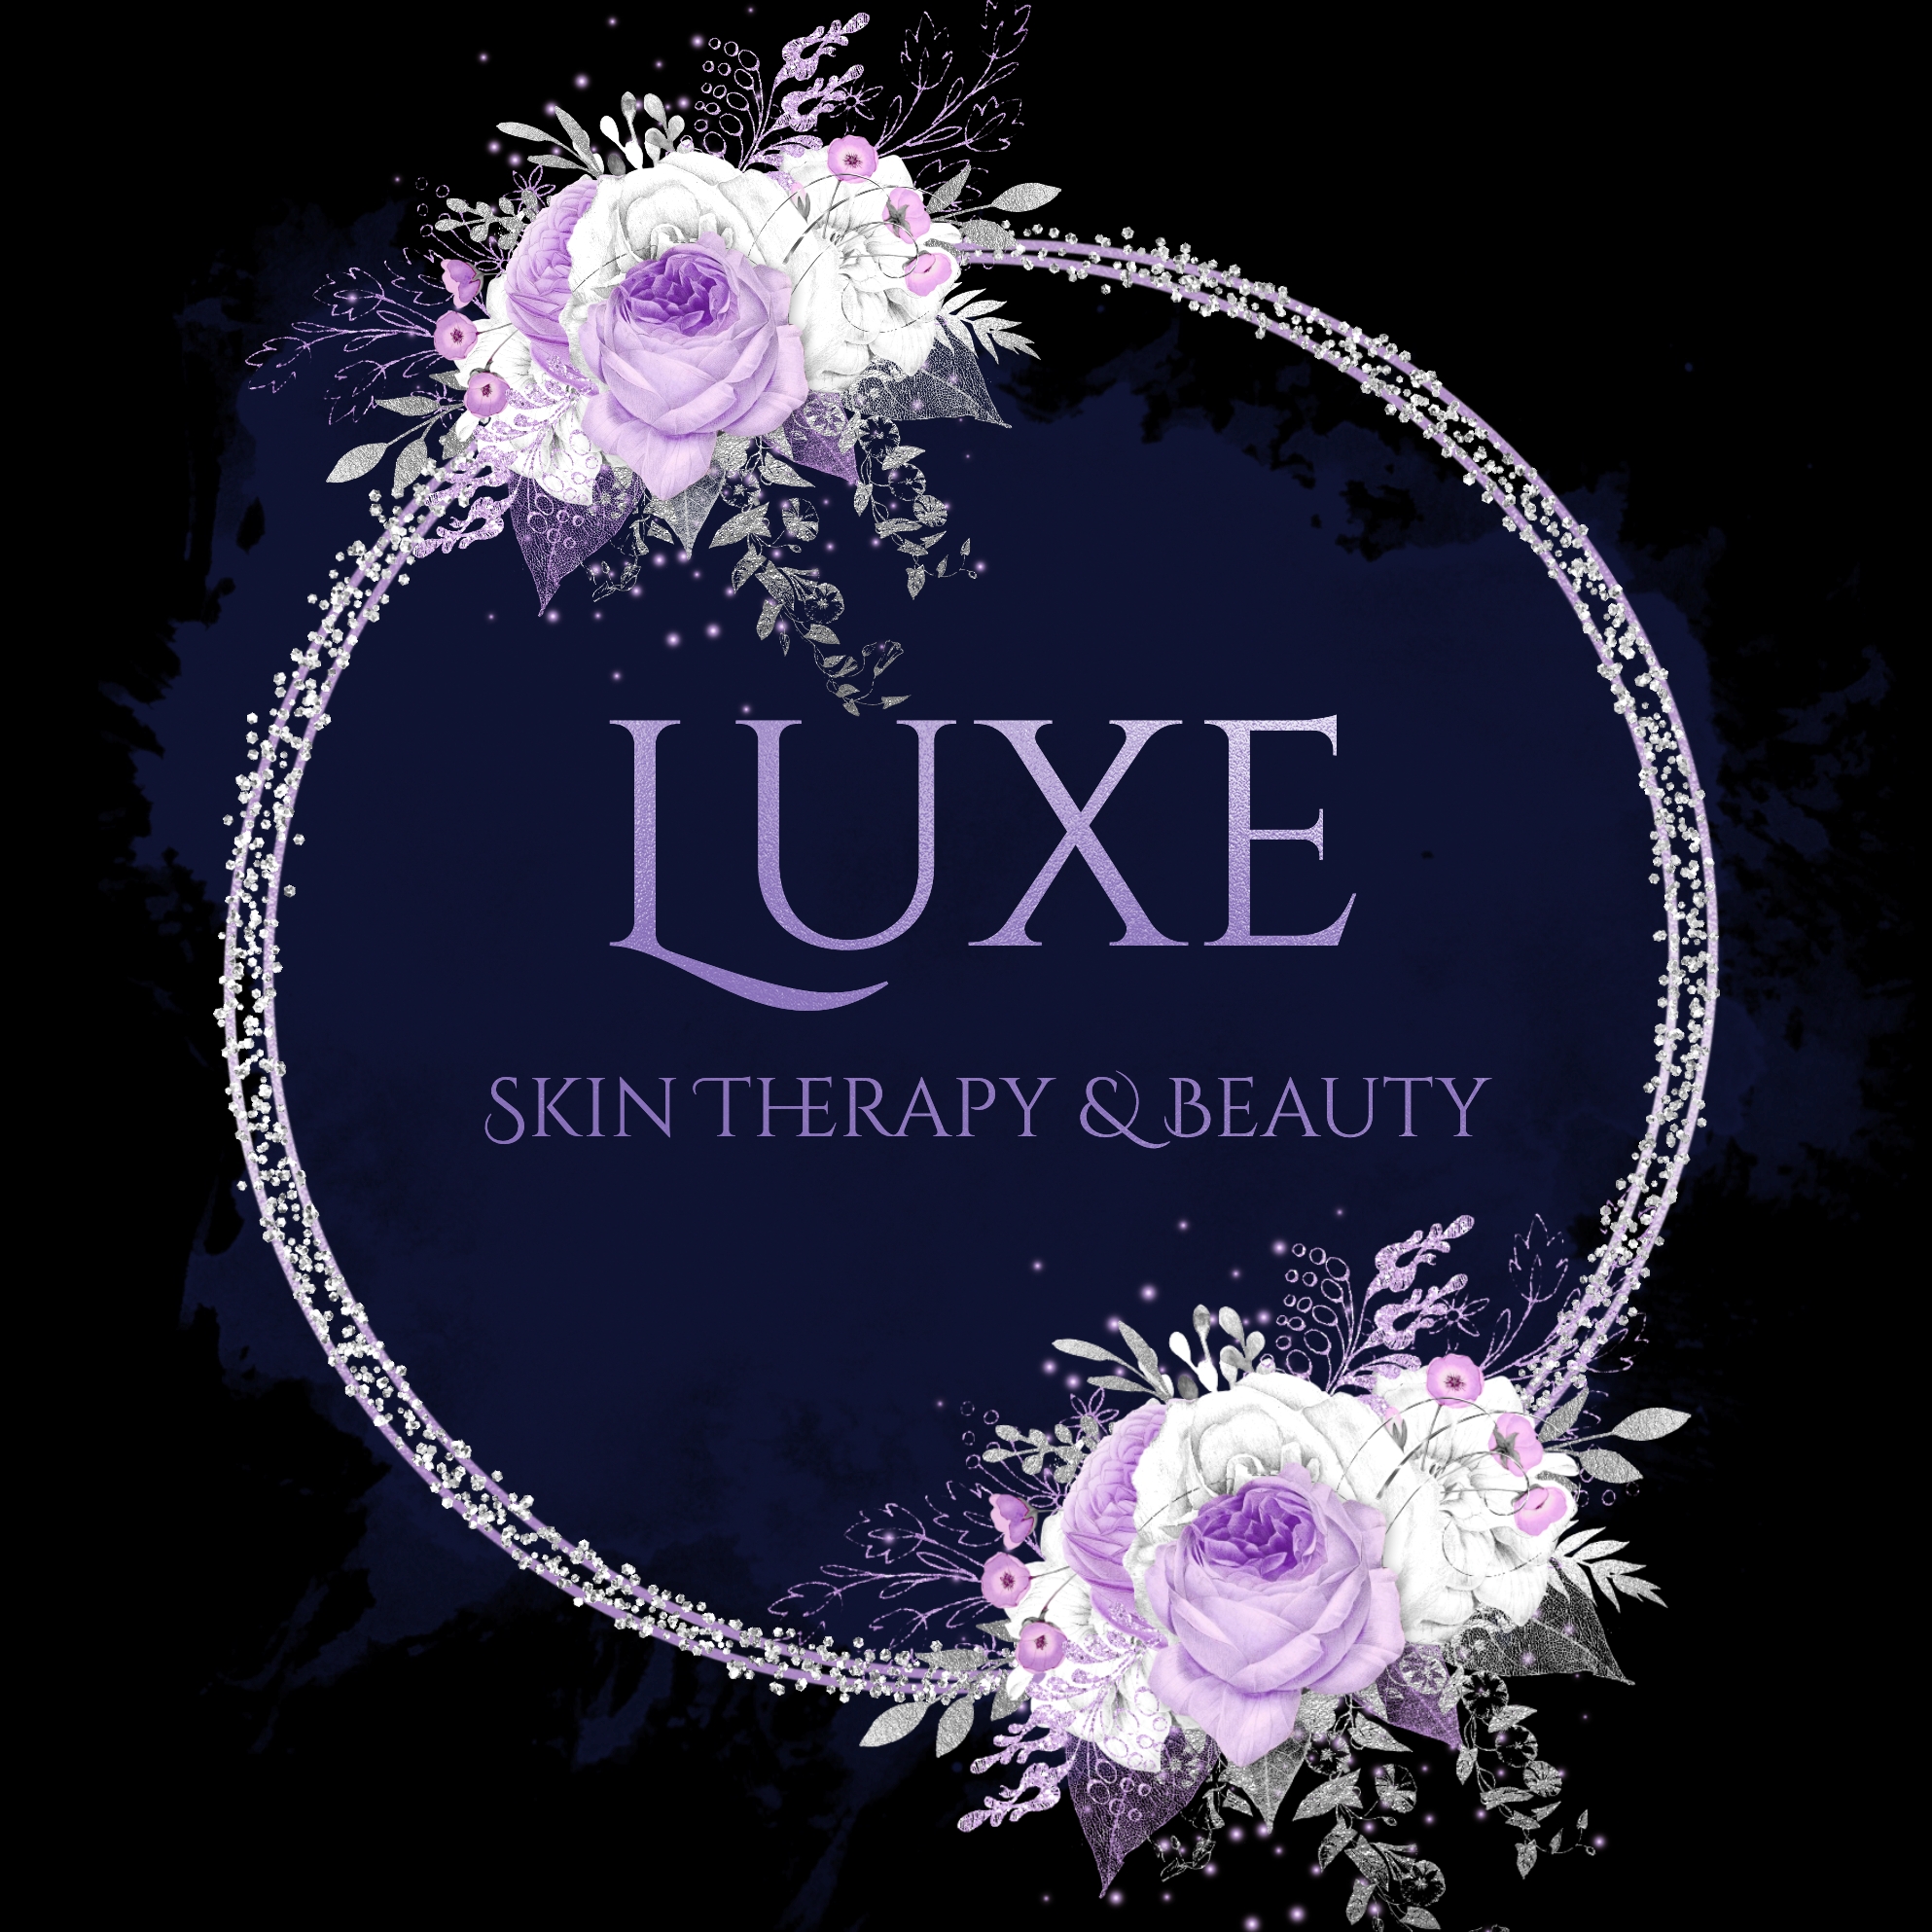 LUXE Skin Therapy & Beauty